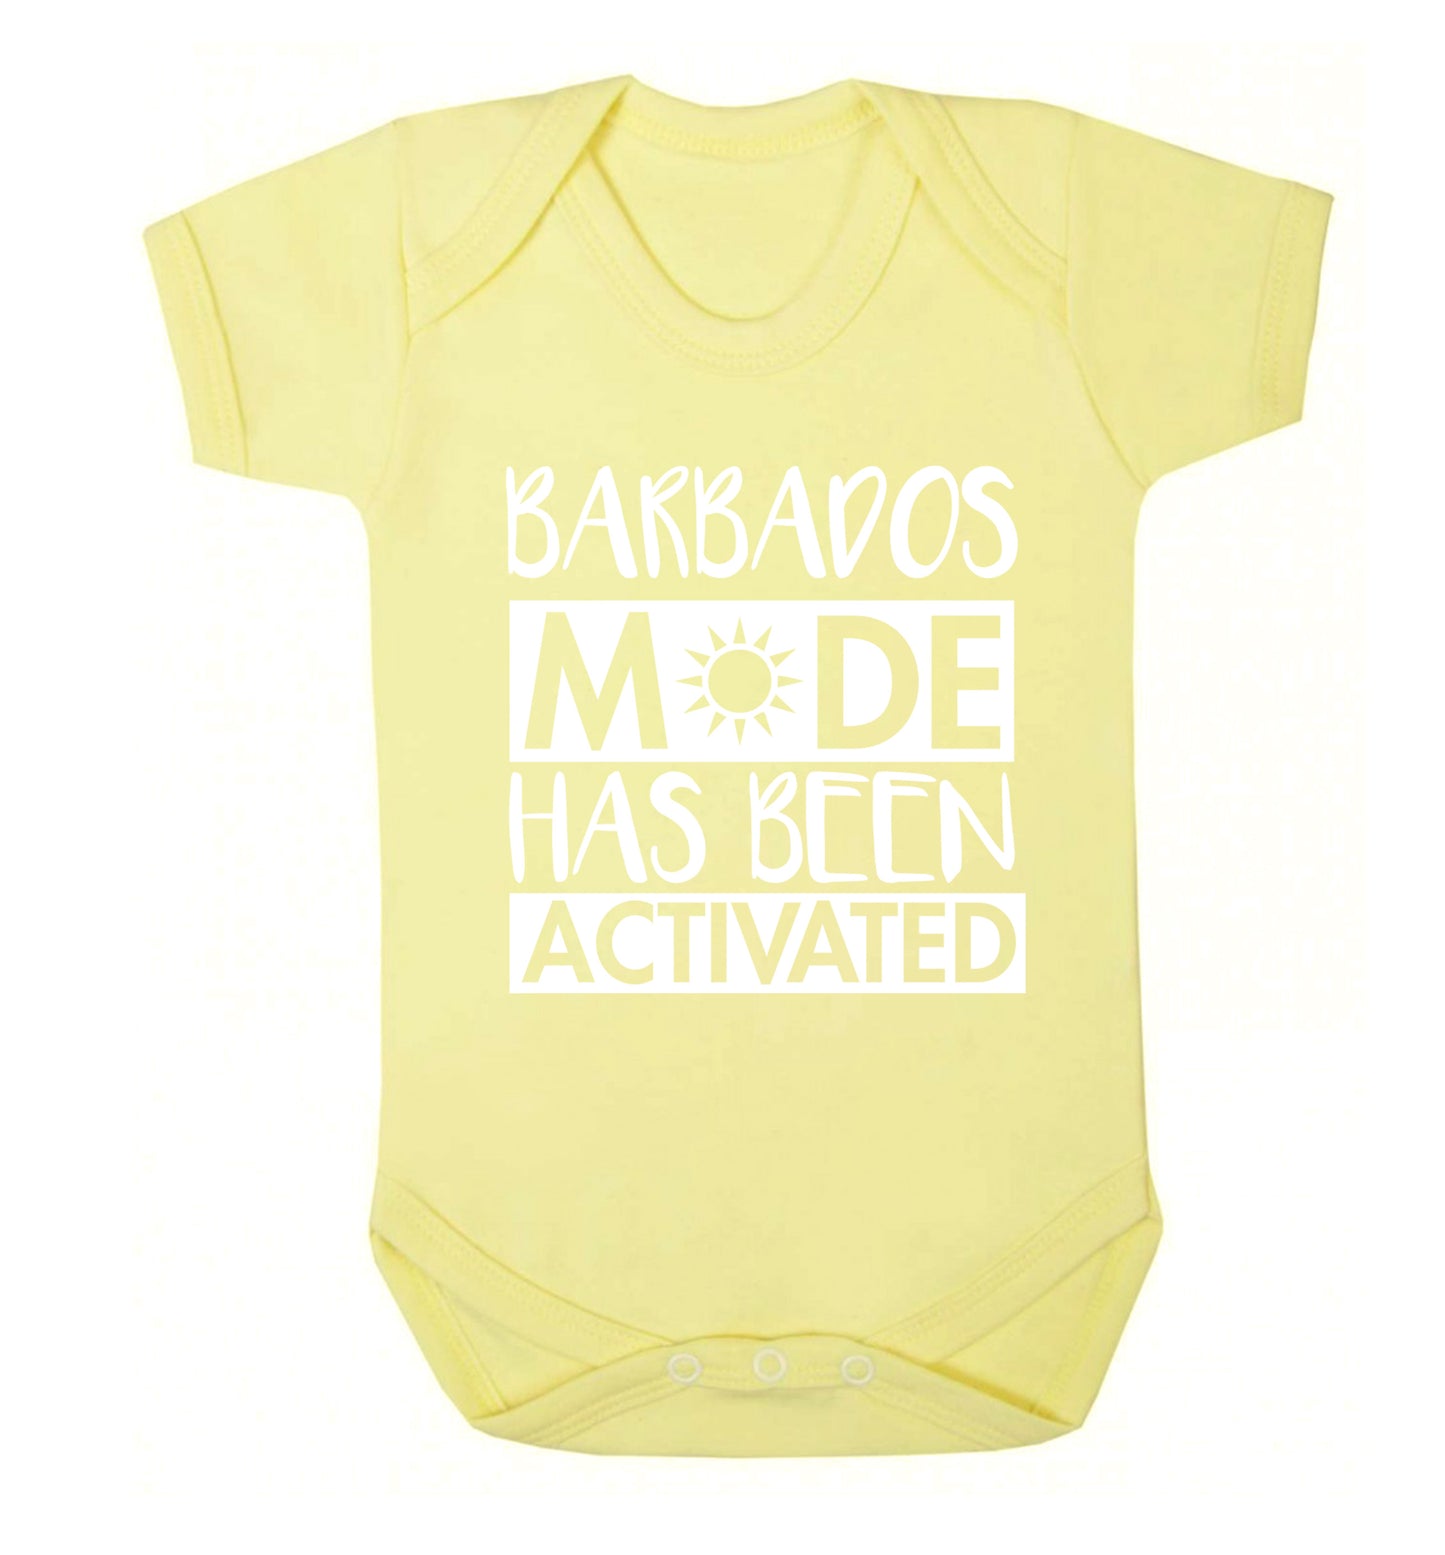 Barbados mode has been activated Baby Vest pale yellow 18-24 months